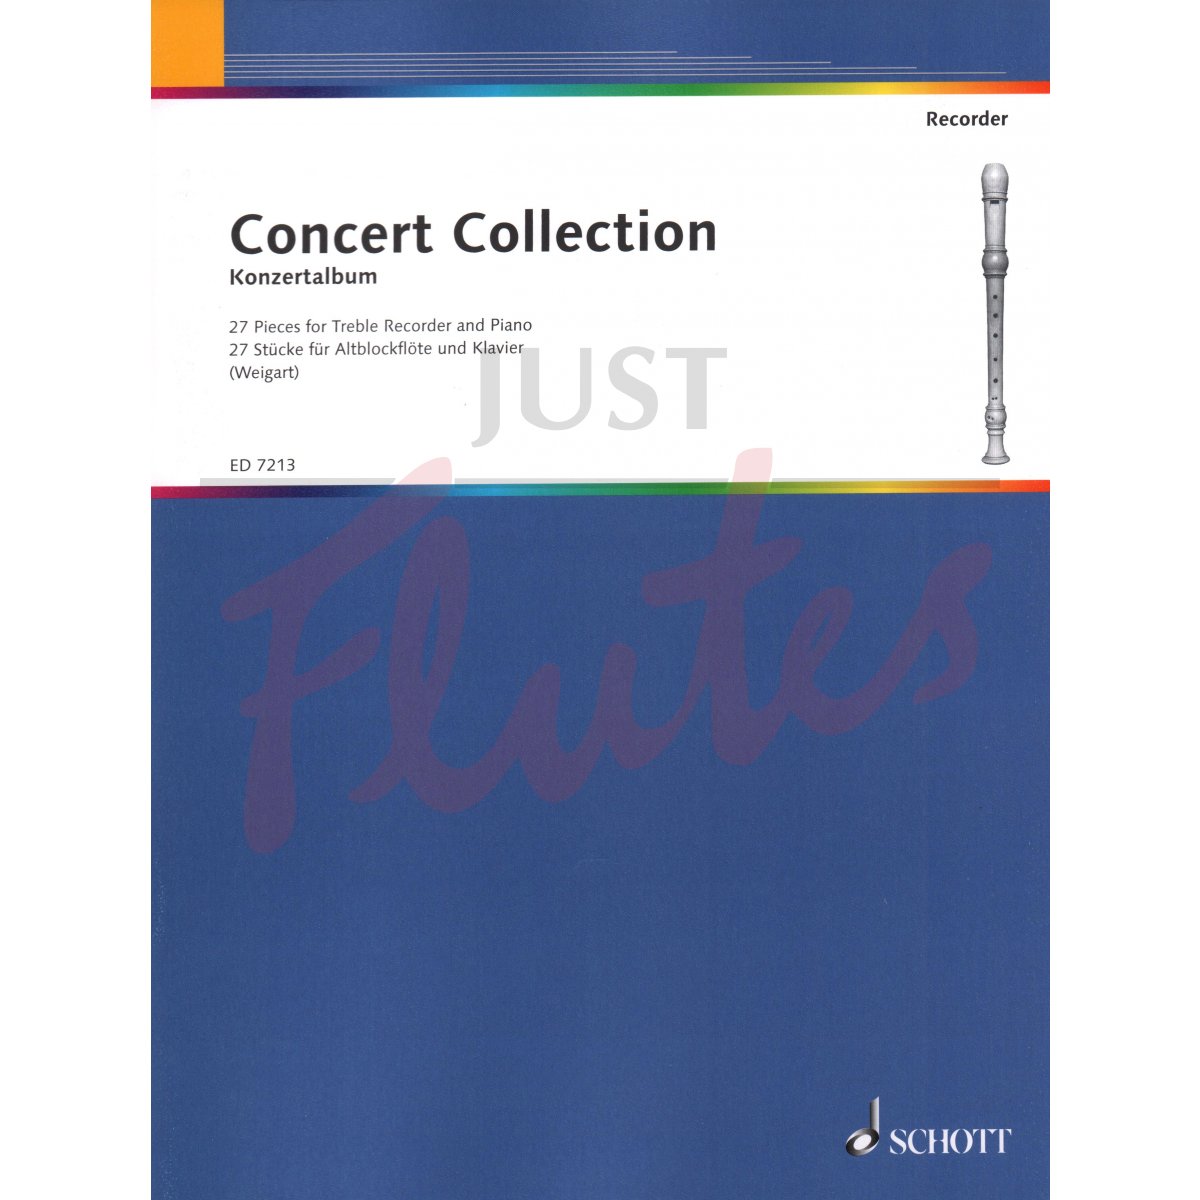 Concert Collection for Treble Recorder and Piano